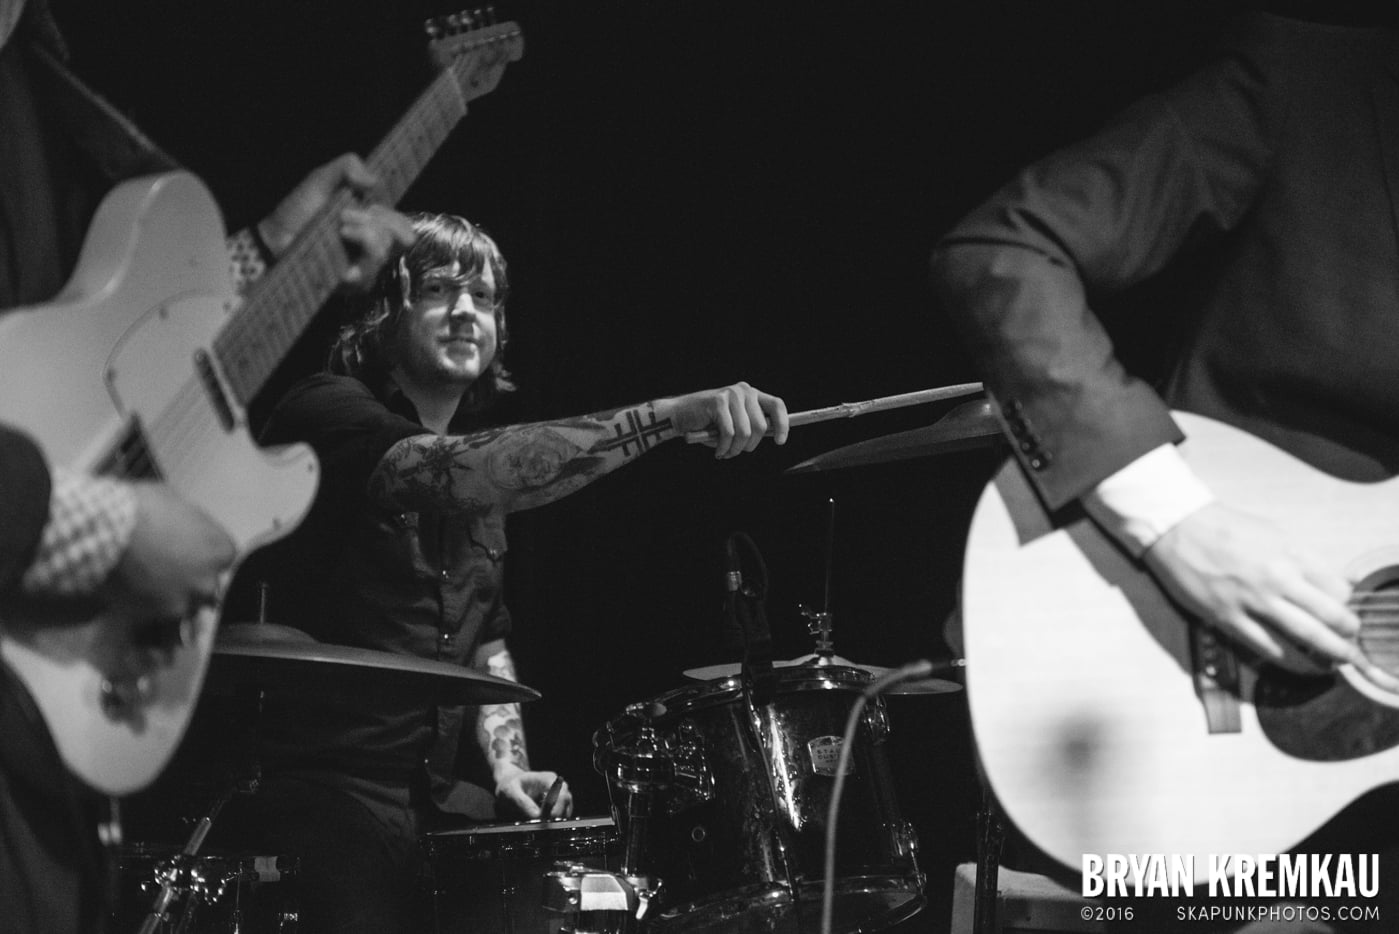 Trapper Schoepp & The Shades @ Bowery Electric, NYC - 11.20.14 (36)